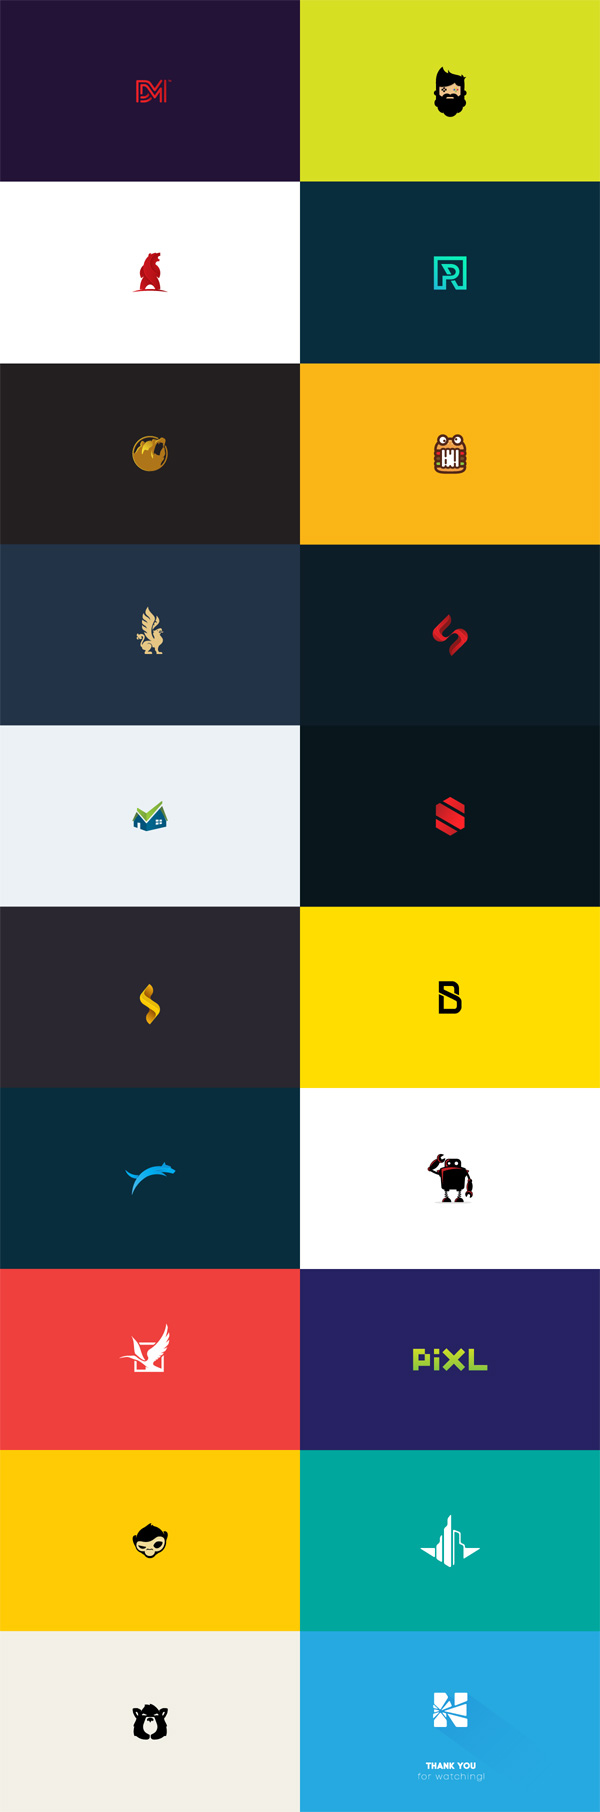 Colored logos and marks by graphic designer and illustrator Nuray Nuri.